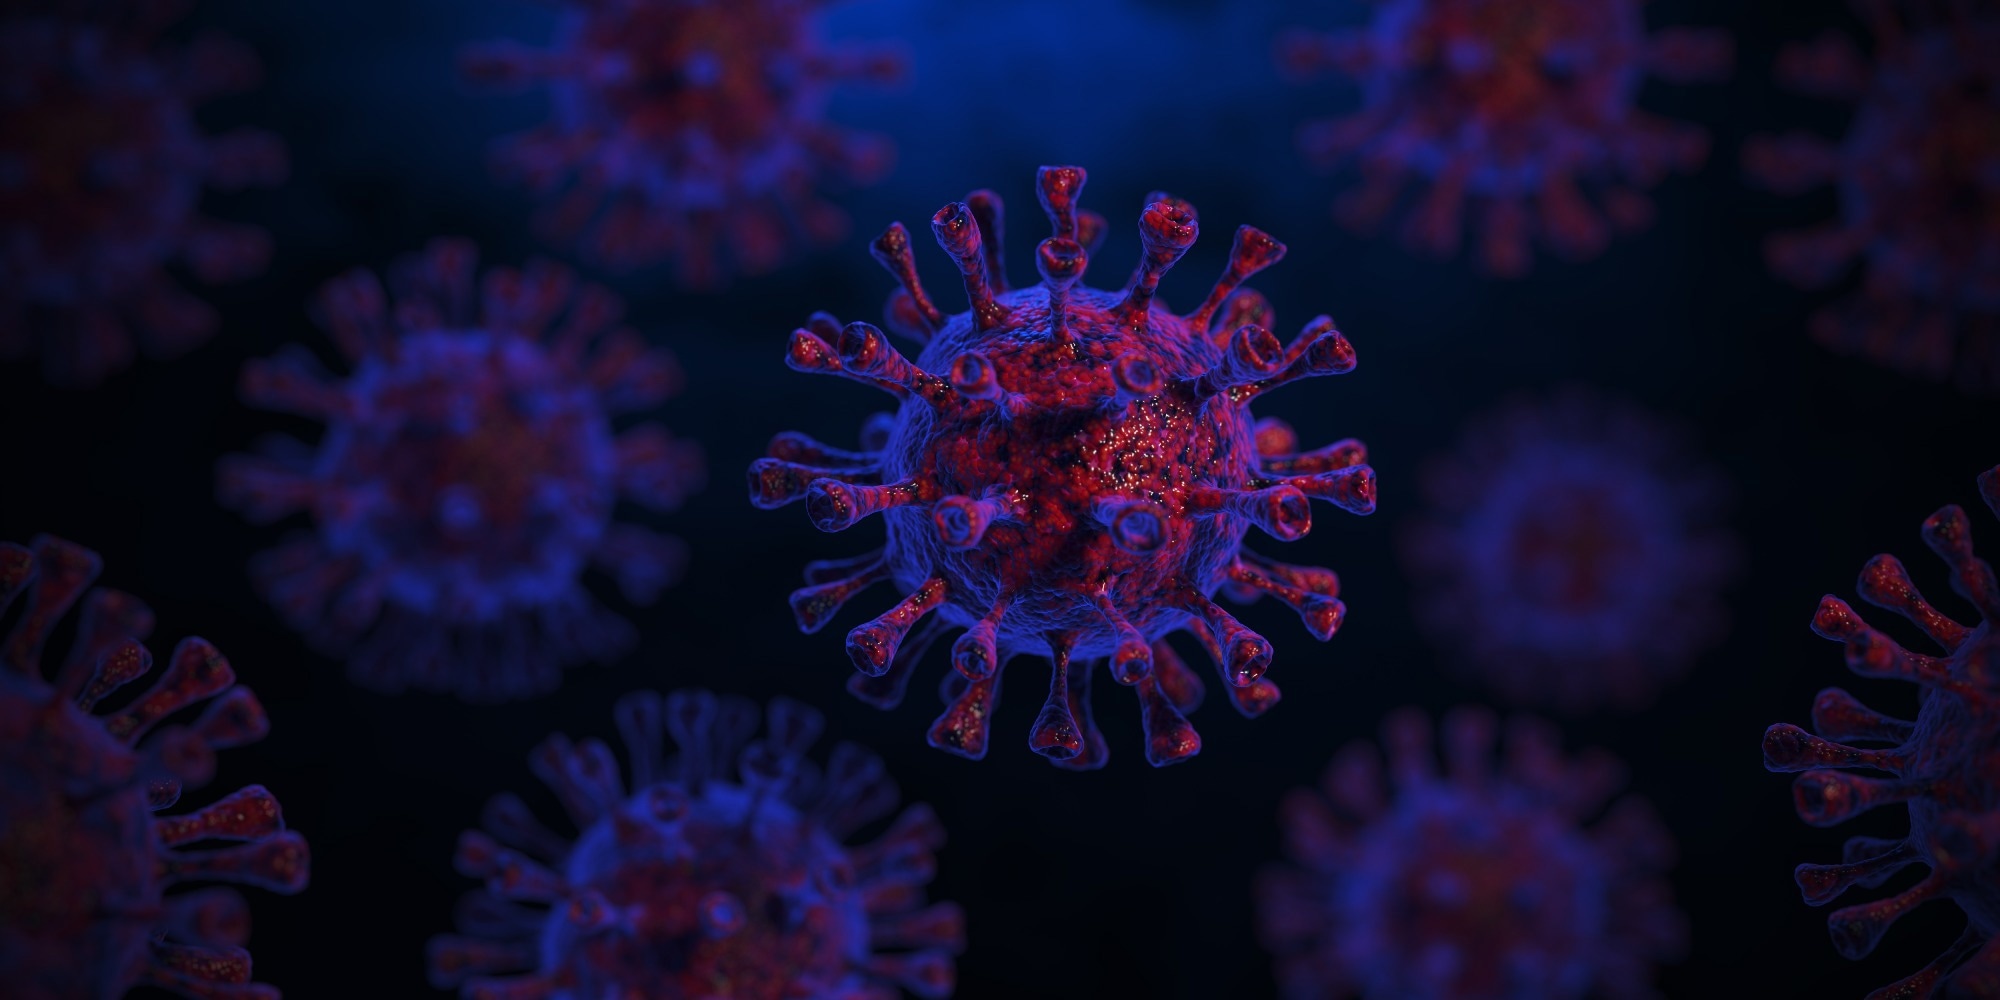 Study: Rapid threat detection in SARS-CoV-2. Image Credit: SWKStock/Shutterstock